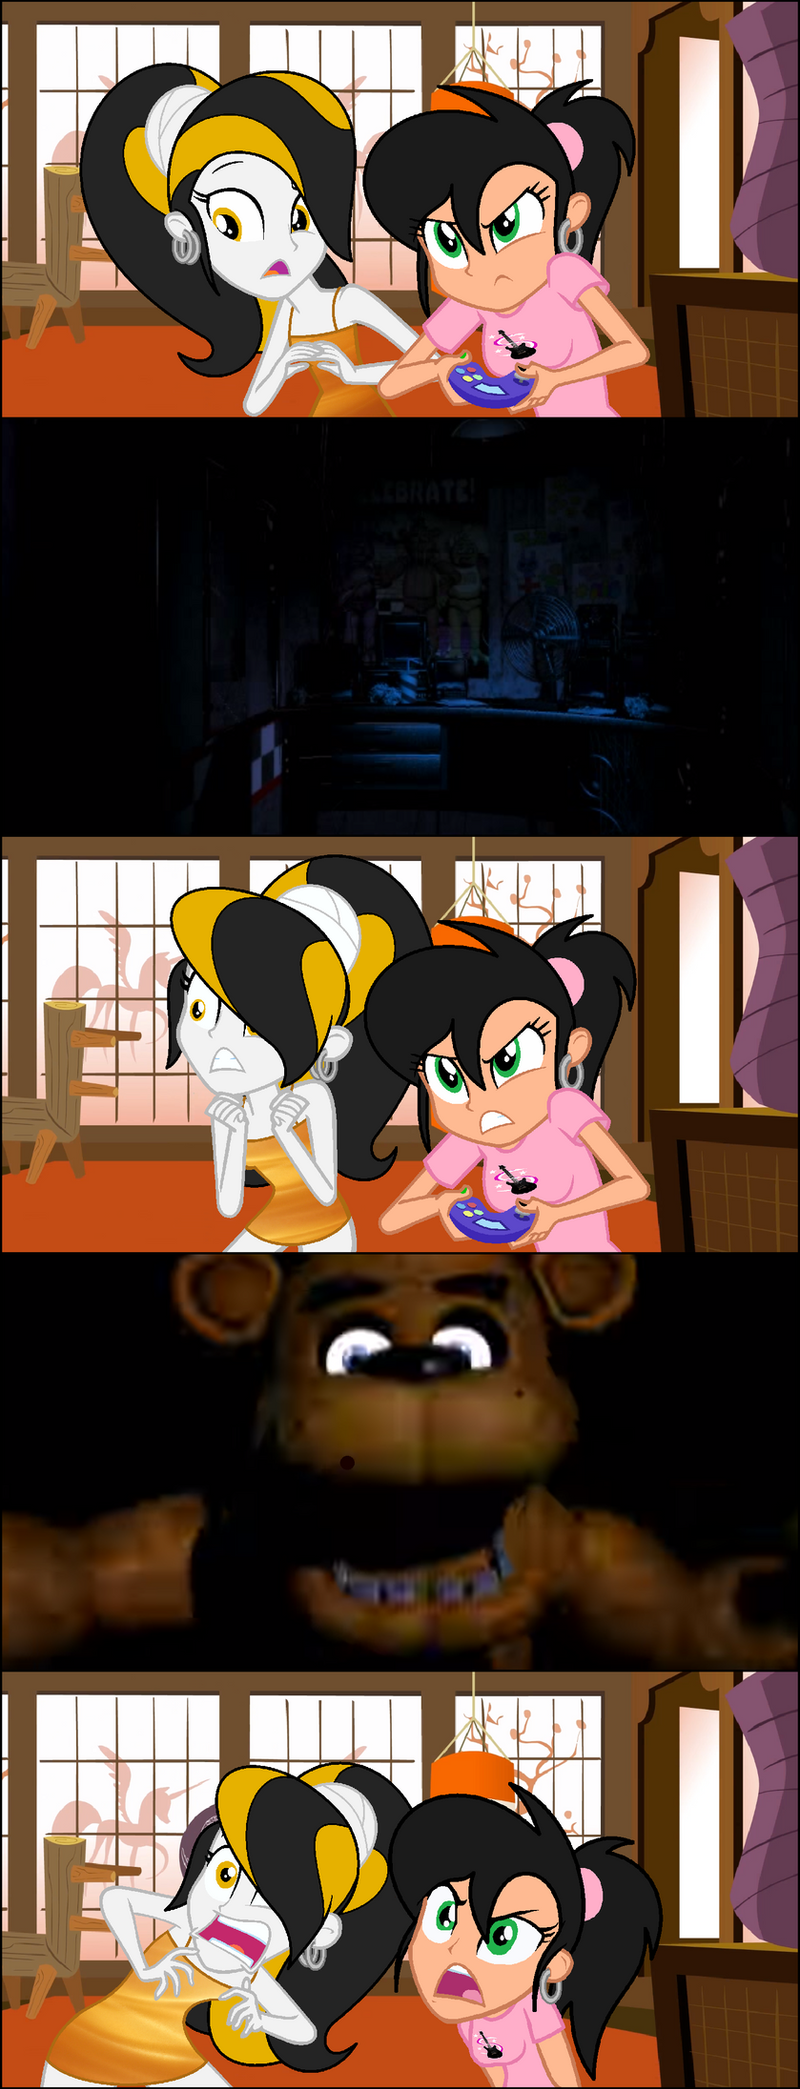 five_night_s_at_fuuuuuuuuuu_______by_therockinstallion-d8d8md0.png